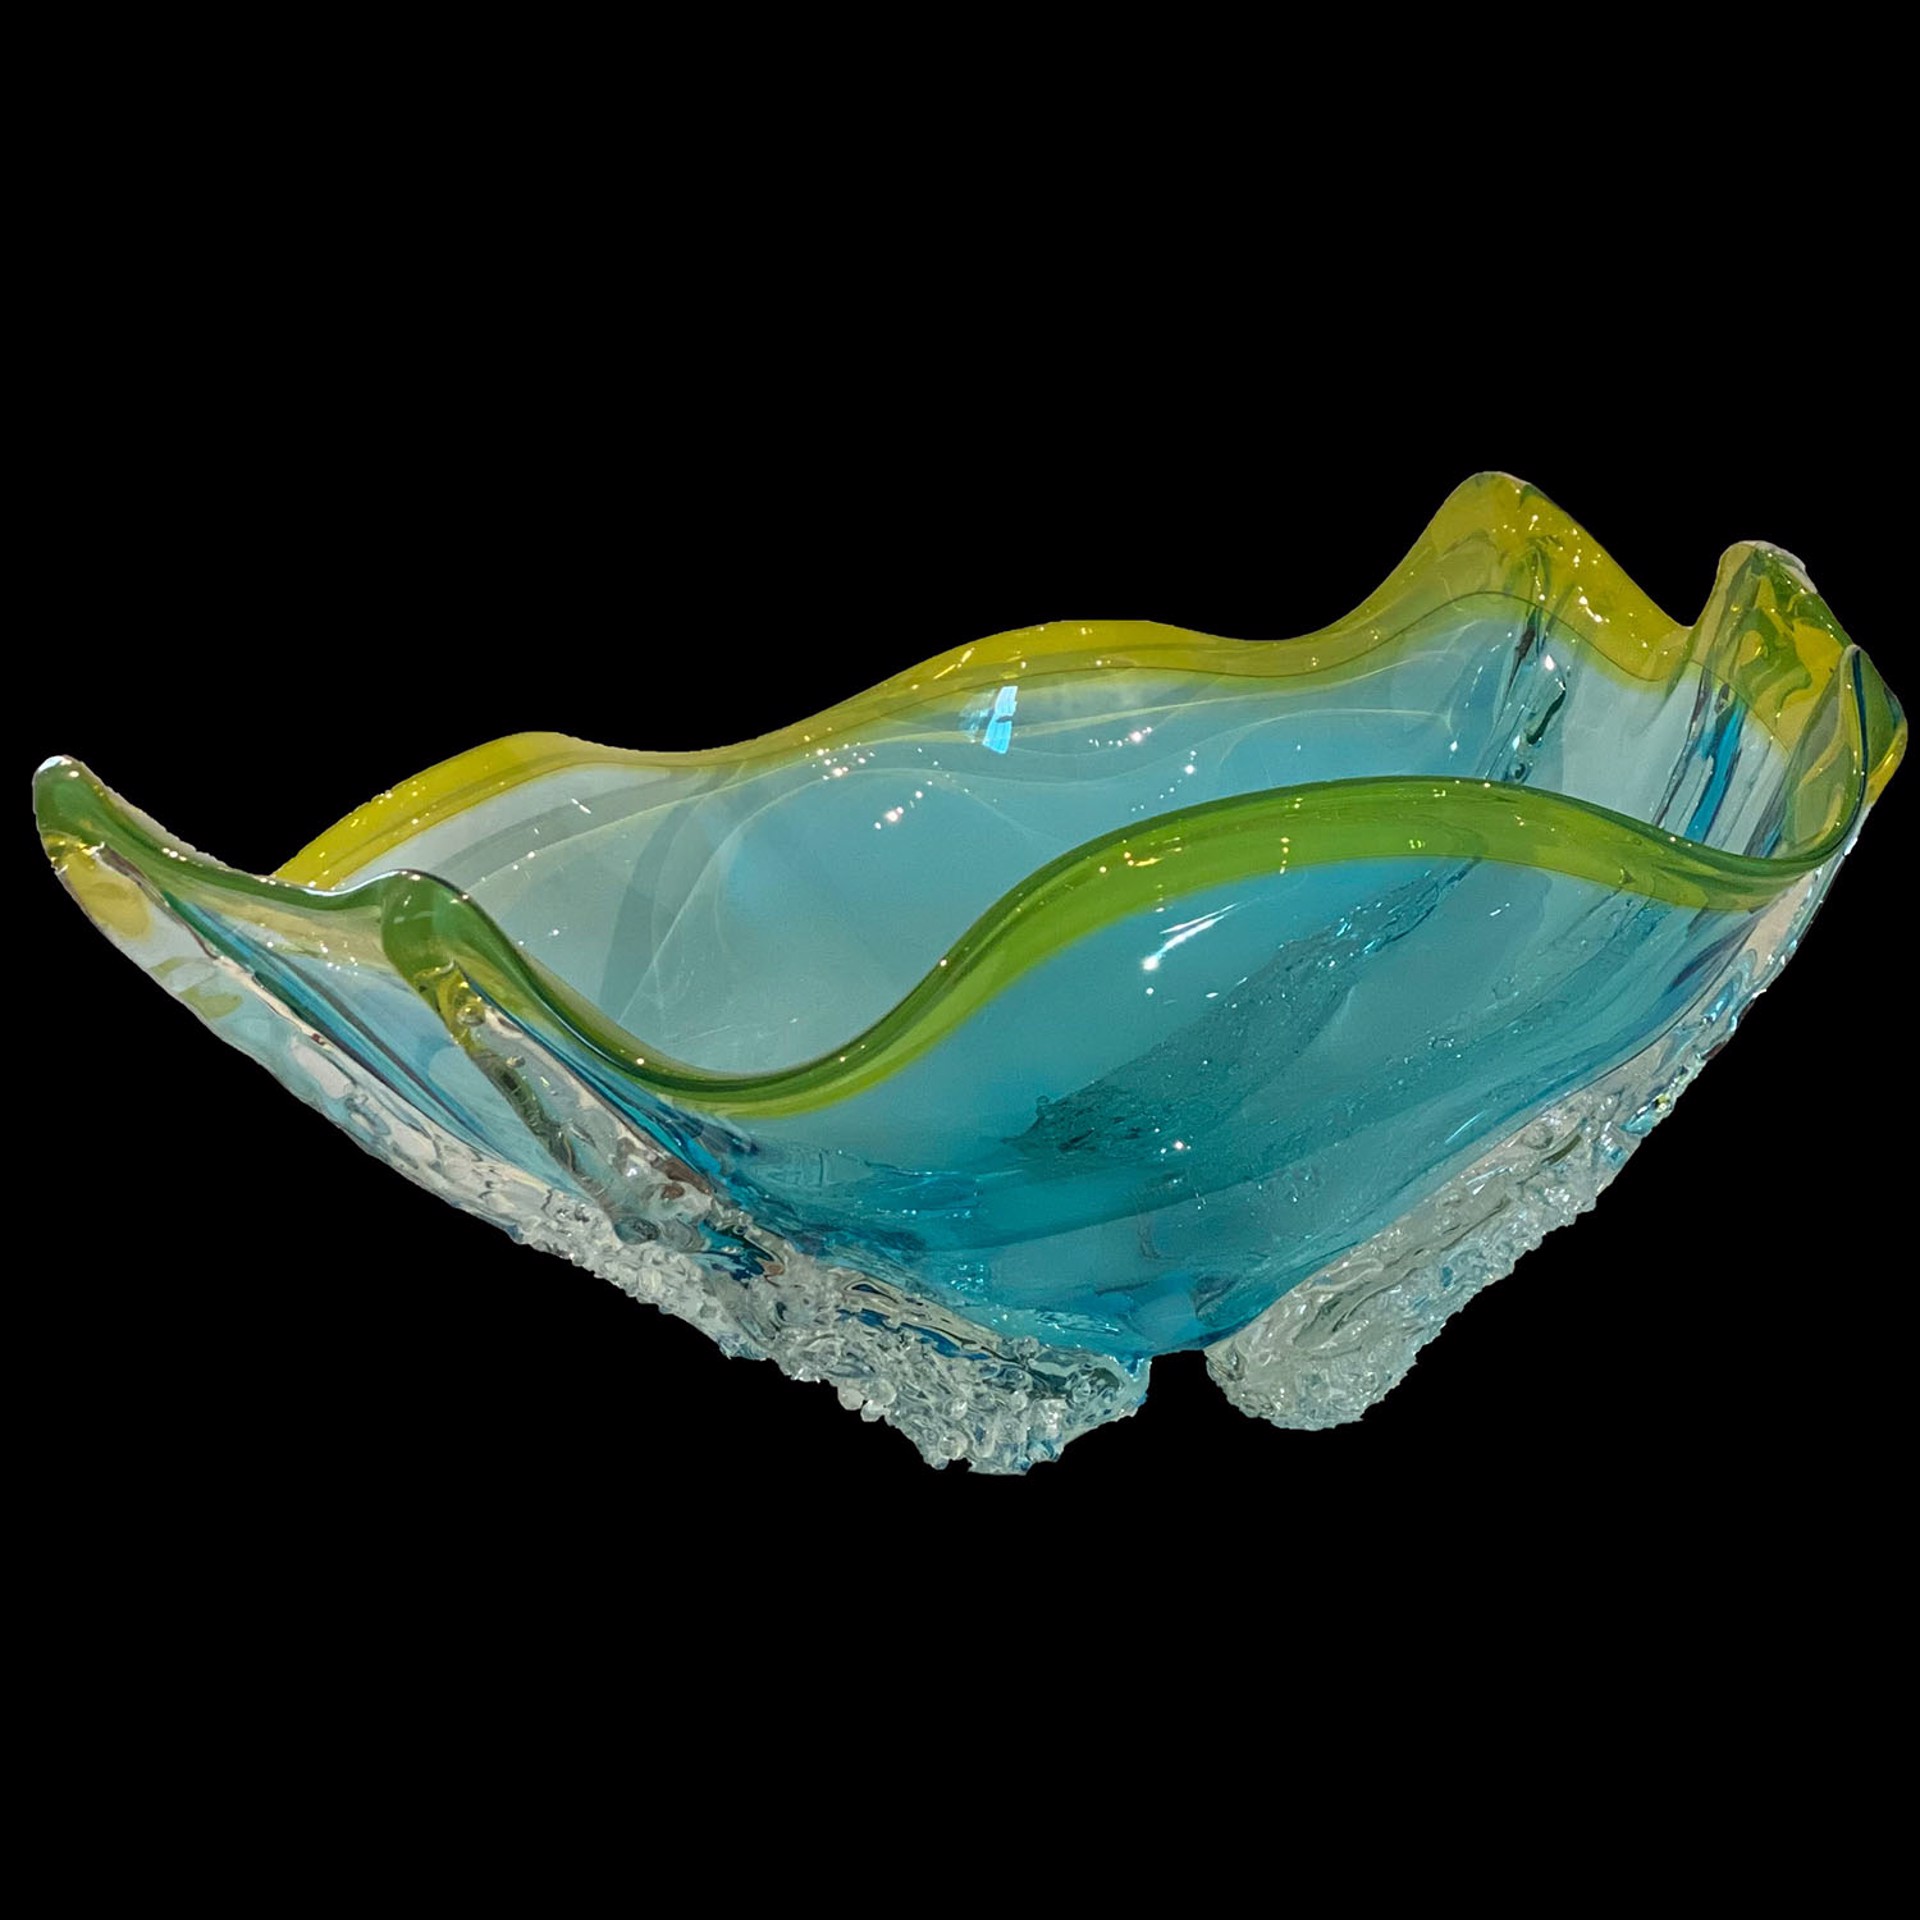 Blue & Yello Octo Bowl by Will Dexter